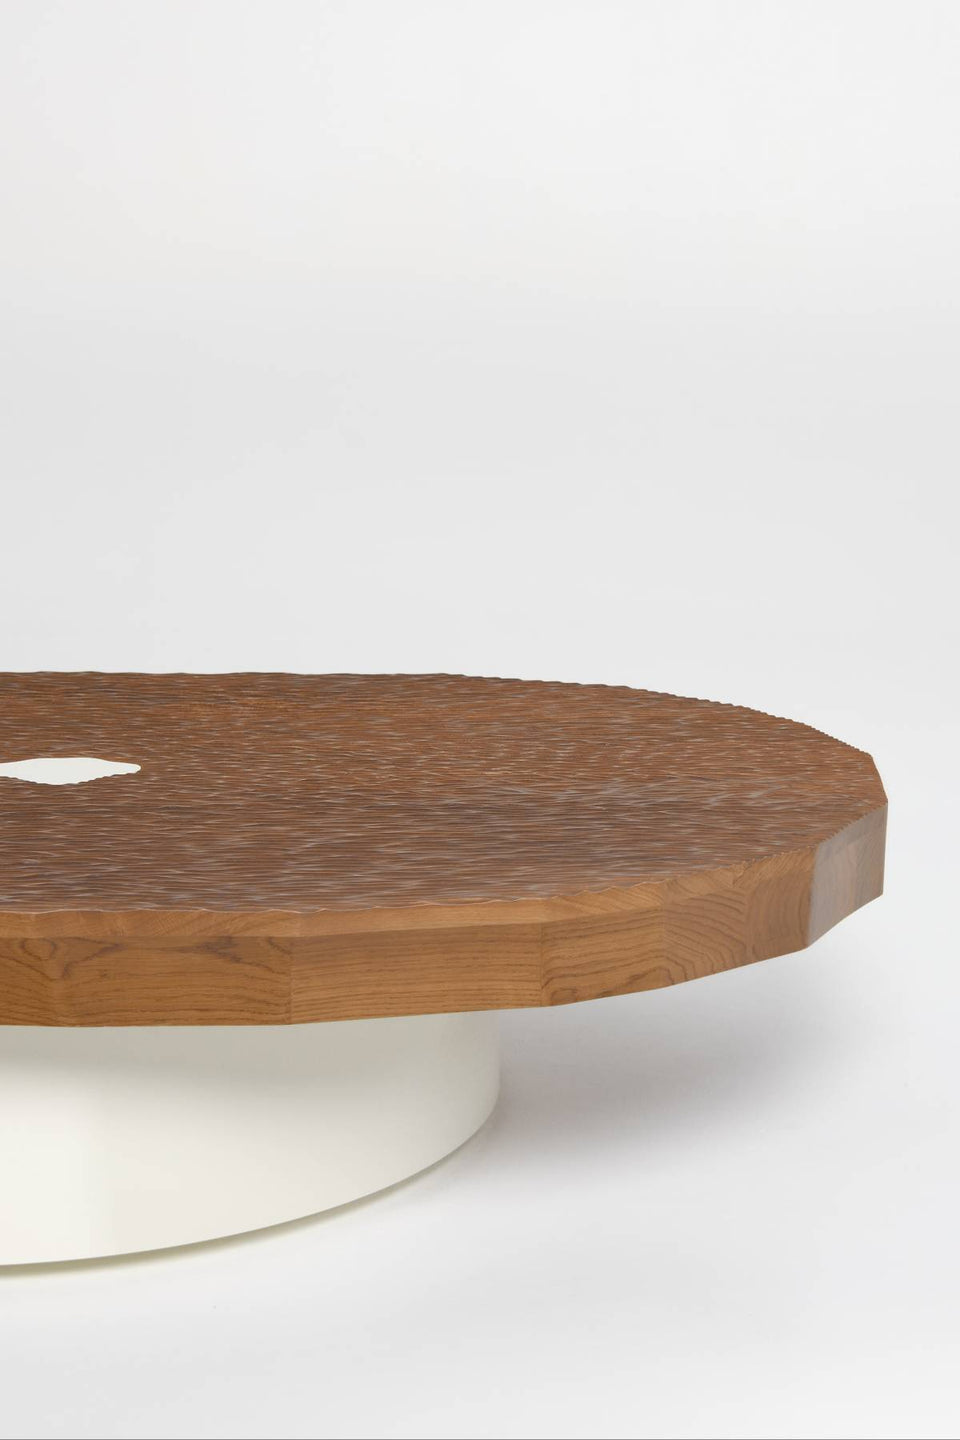 CRAFT OVAL TABLE